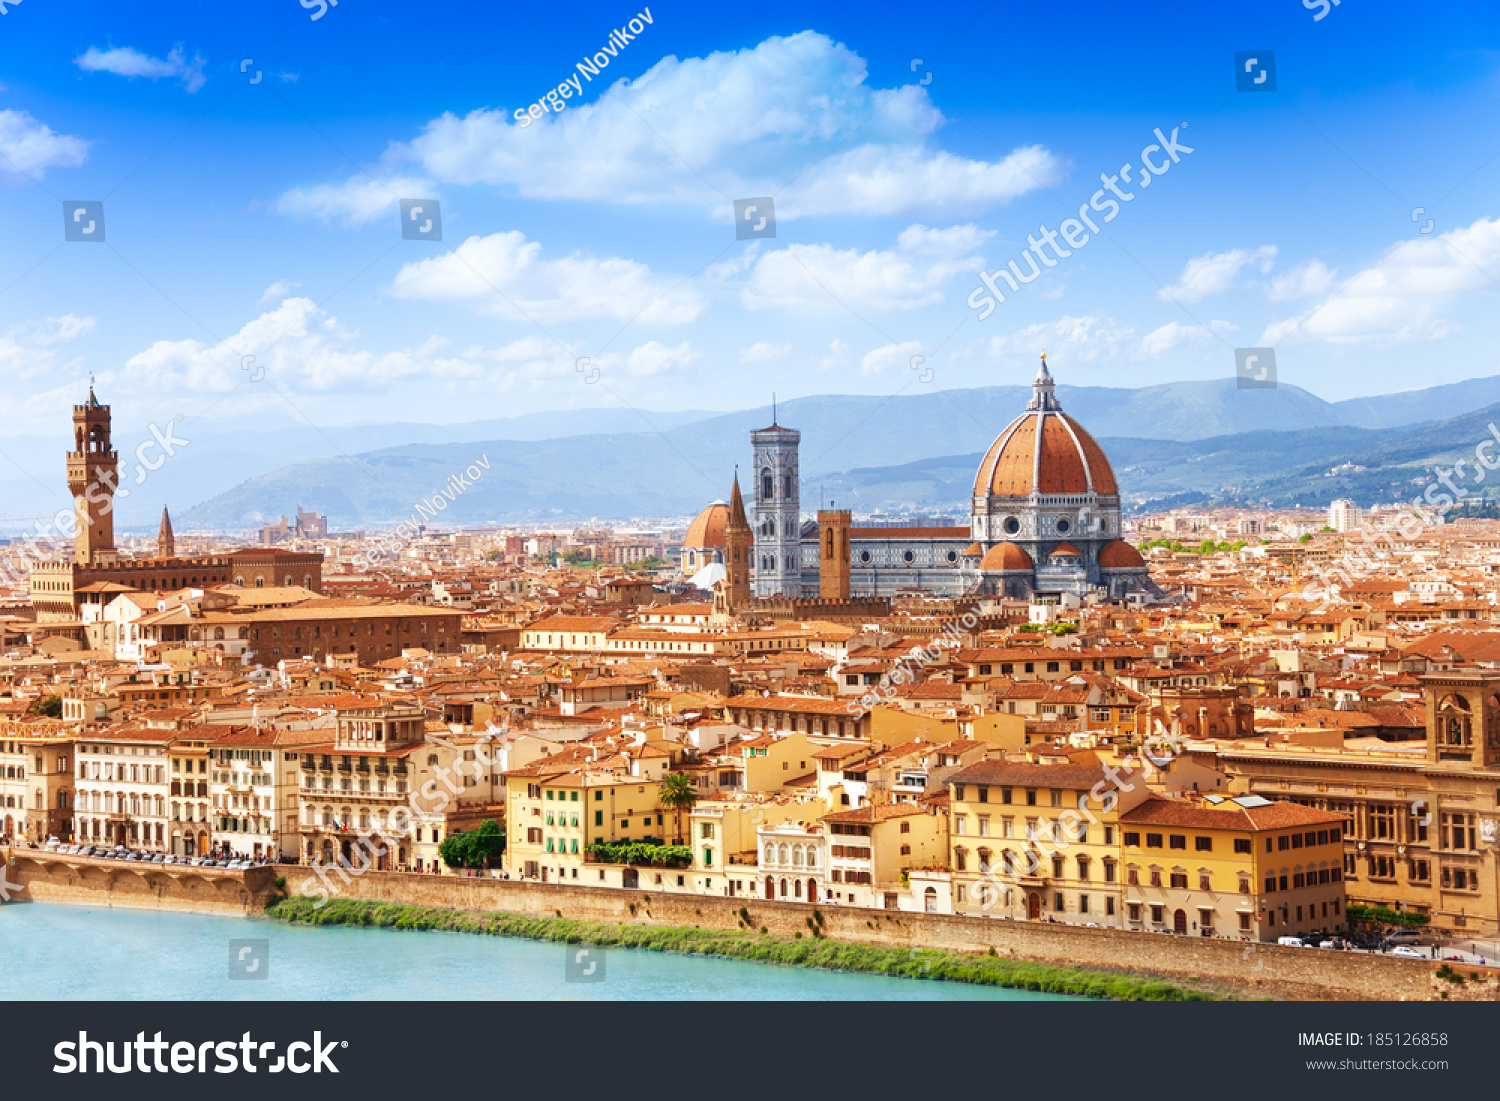 Cityscape panorama of Arno river, towers and cathedrals of Florence #185126858